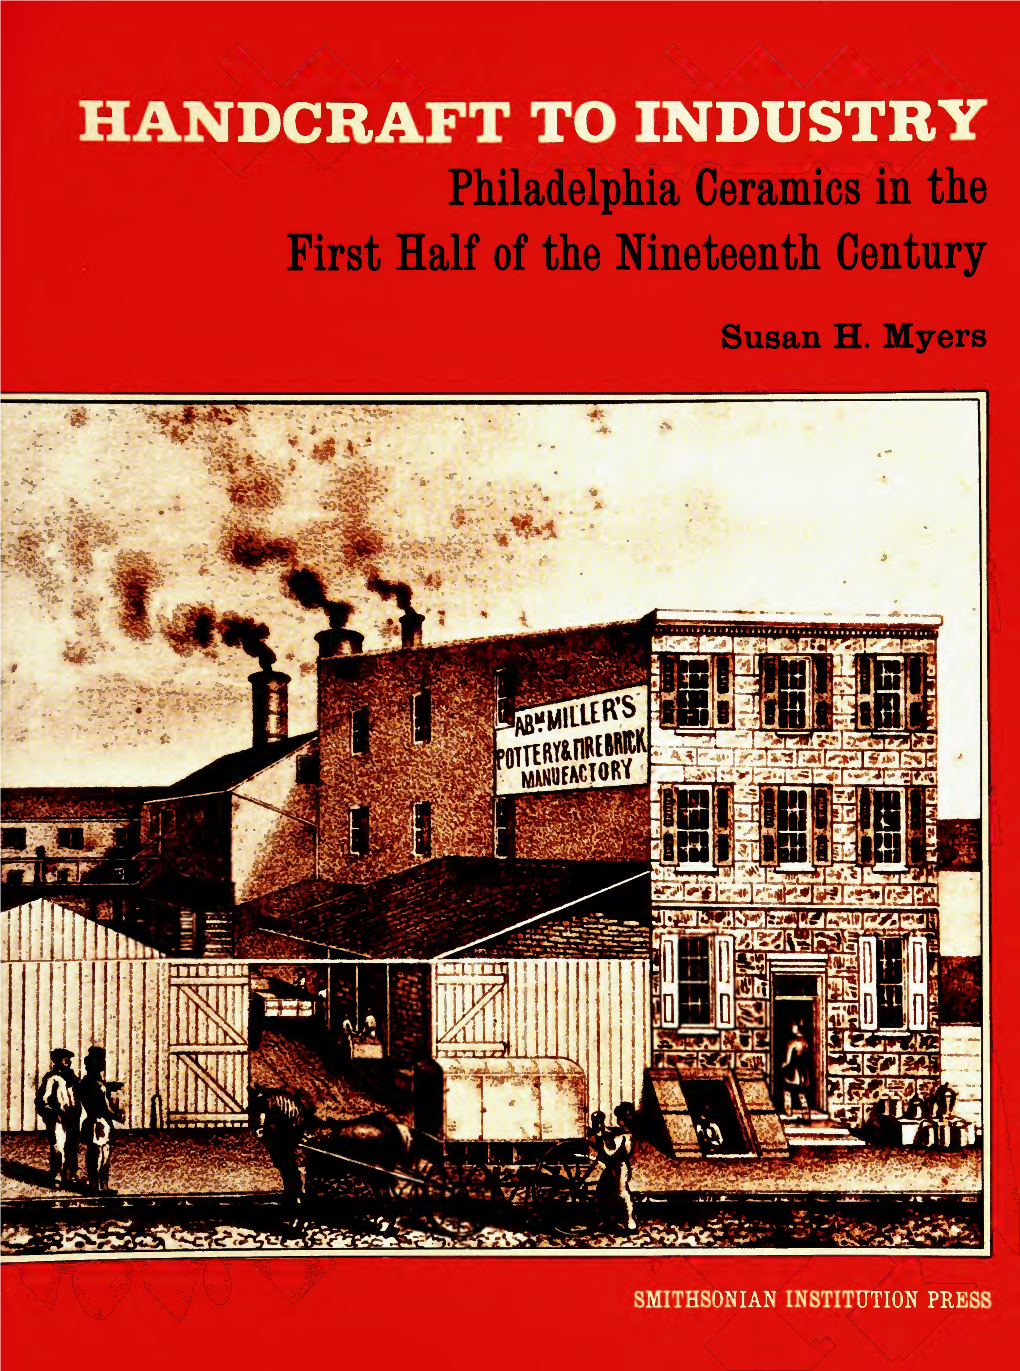 HANDCRAFT to INDUSTRY Philadelphia Ceramics in the First Half of the Nineteenth Century Susan H